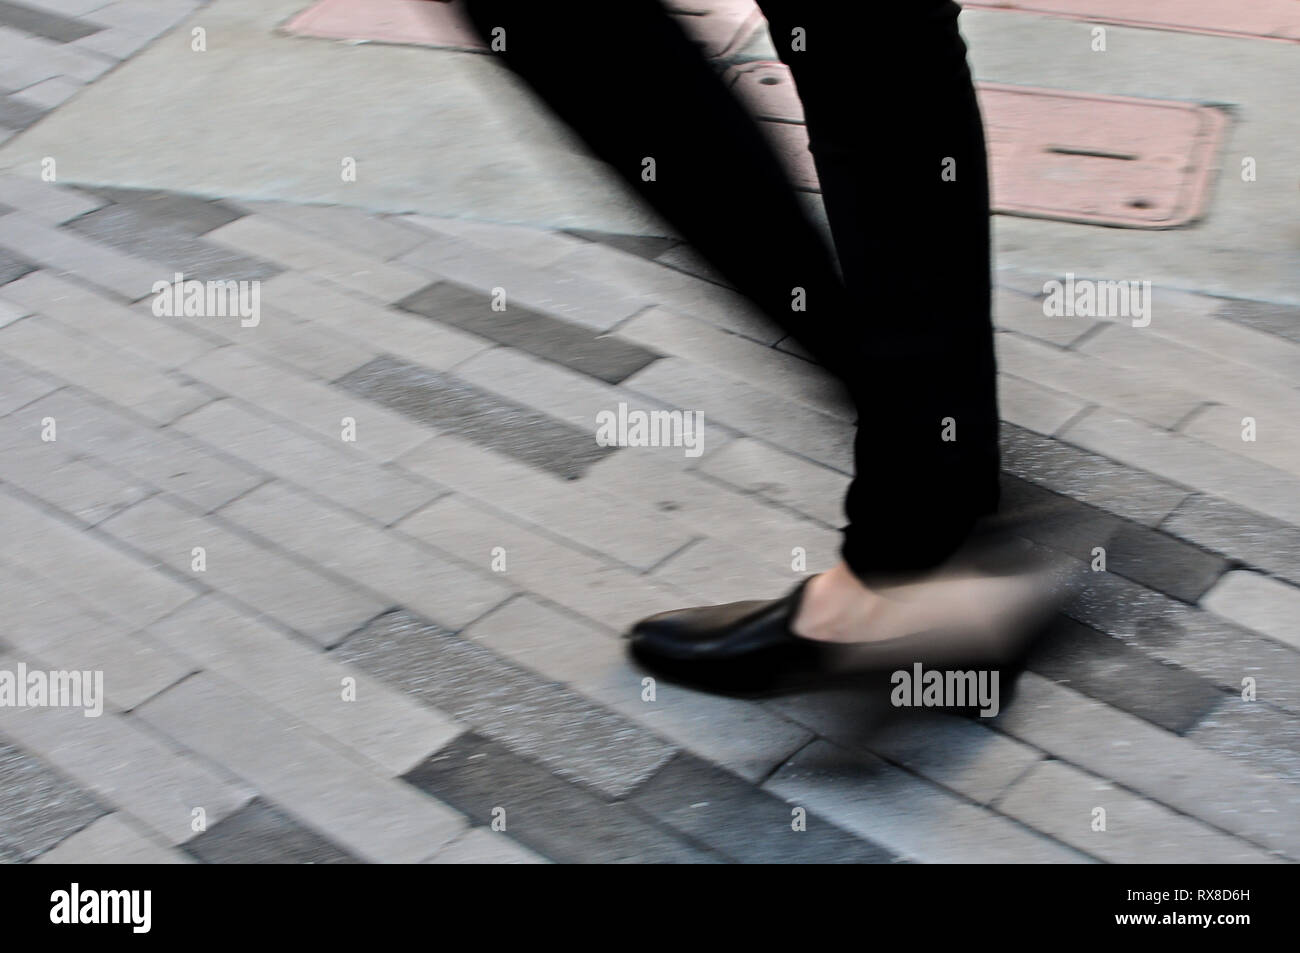 blurry close up lower legs and black shoe of person walking on cobble stone Stock Photo